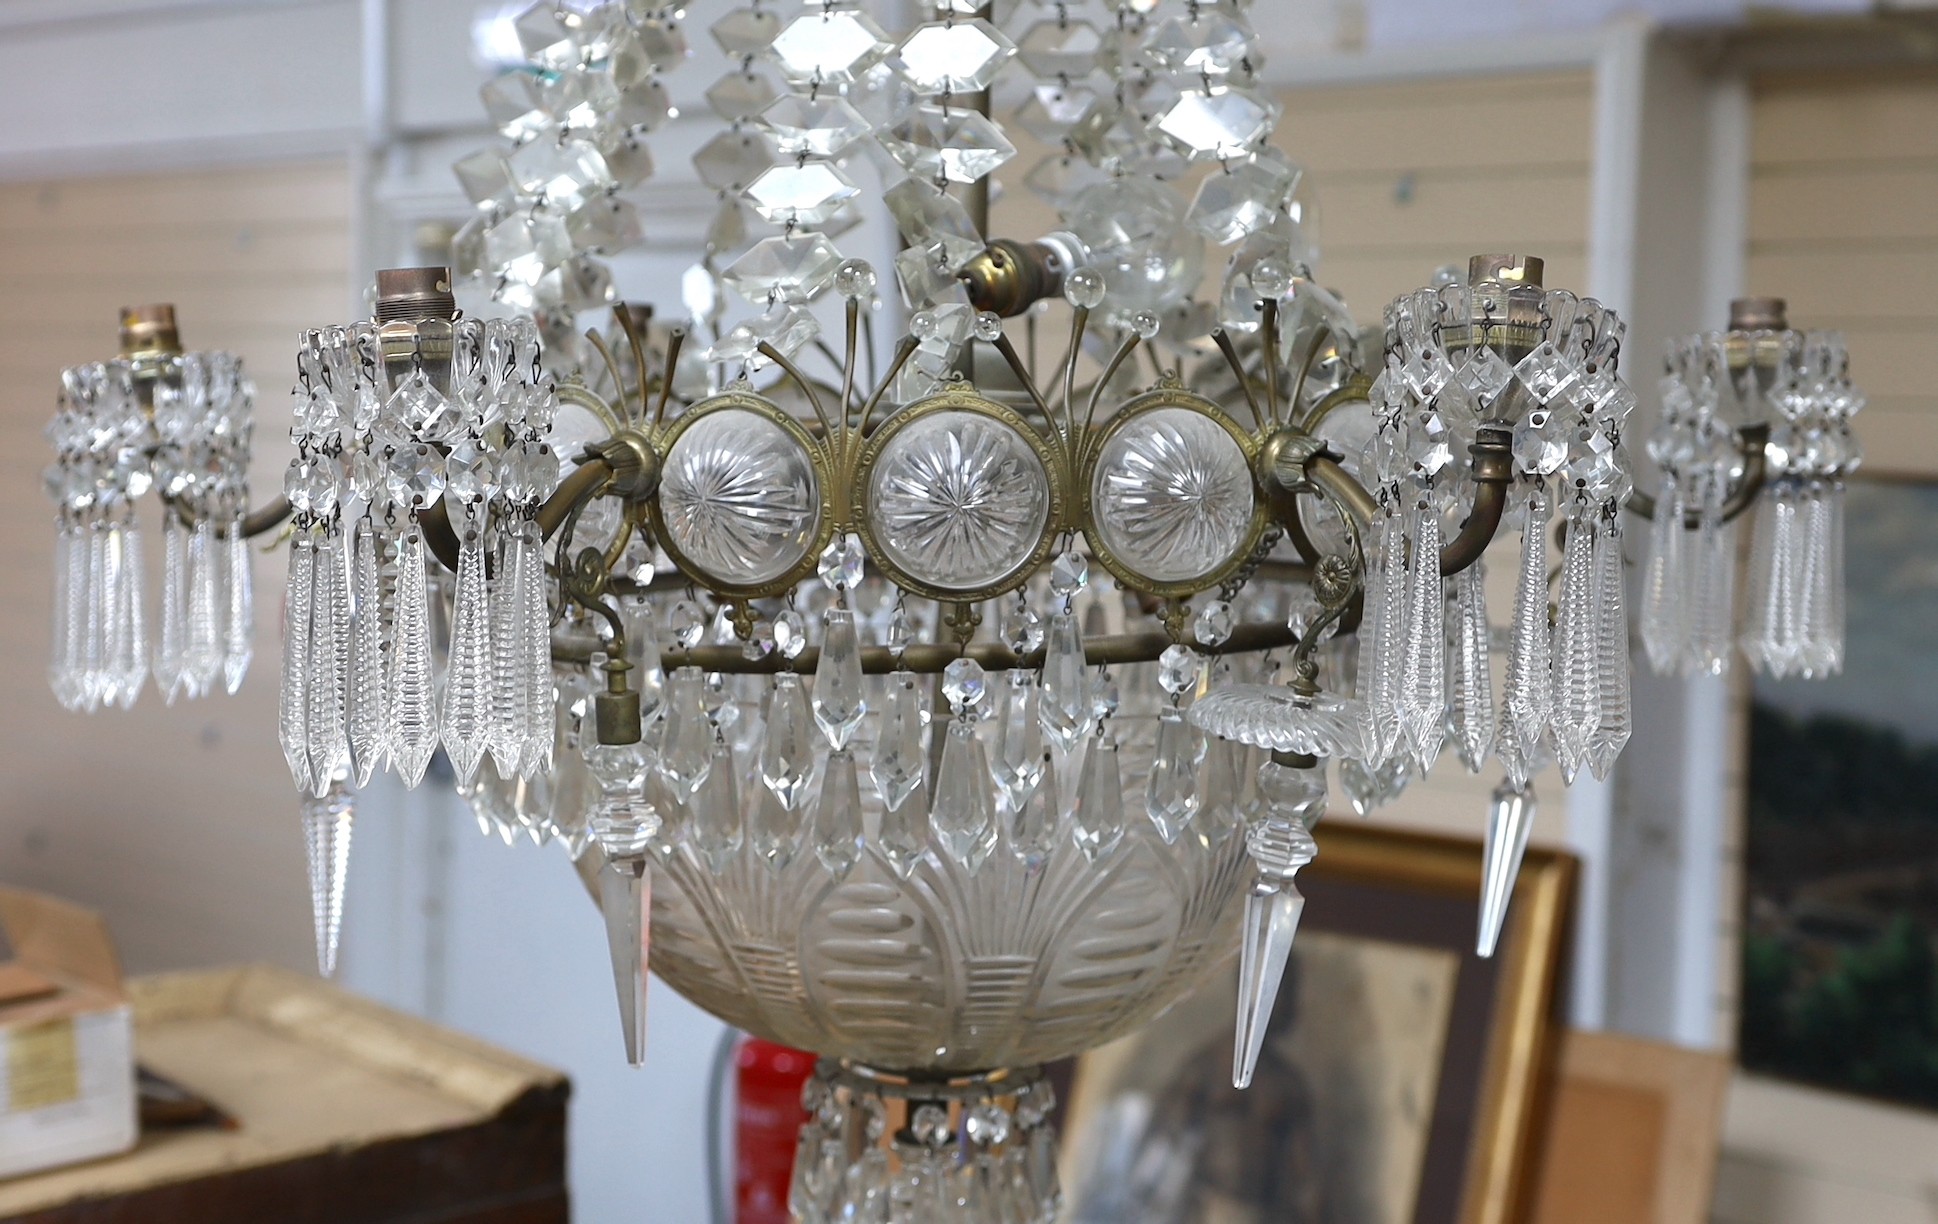 An Edwardian cut glass chandelier, with swagged top and lozenge shaped drops sweeping down to the - Image 2 of 4